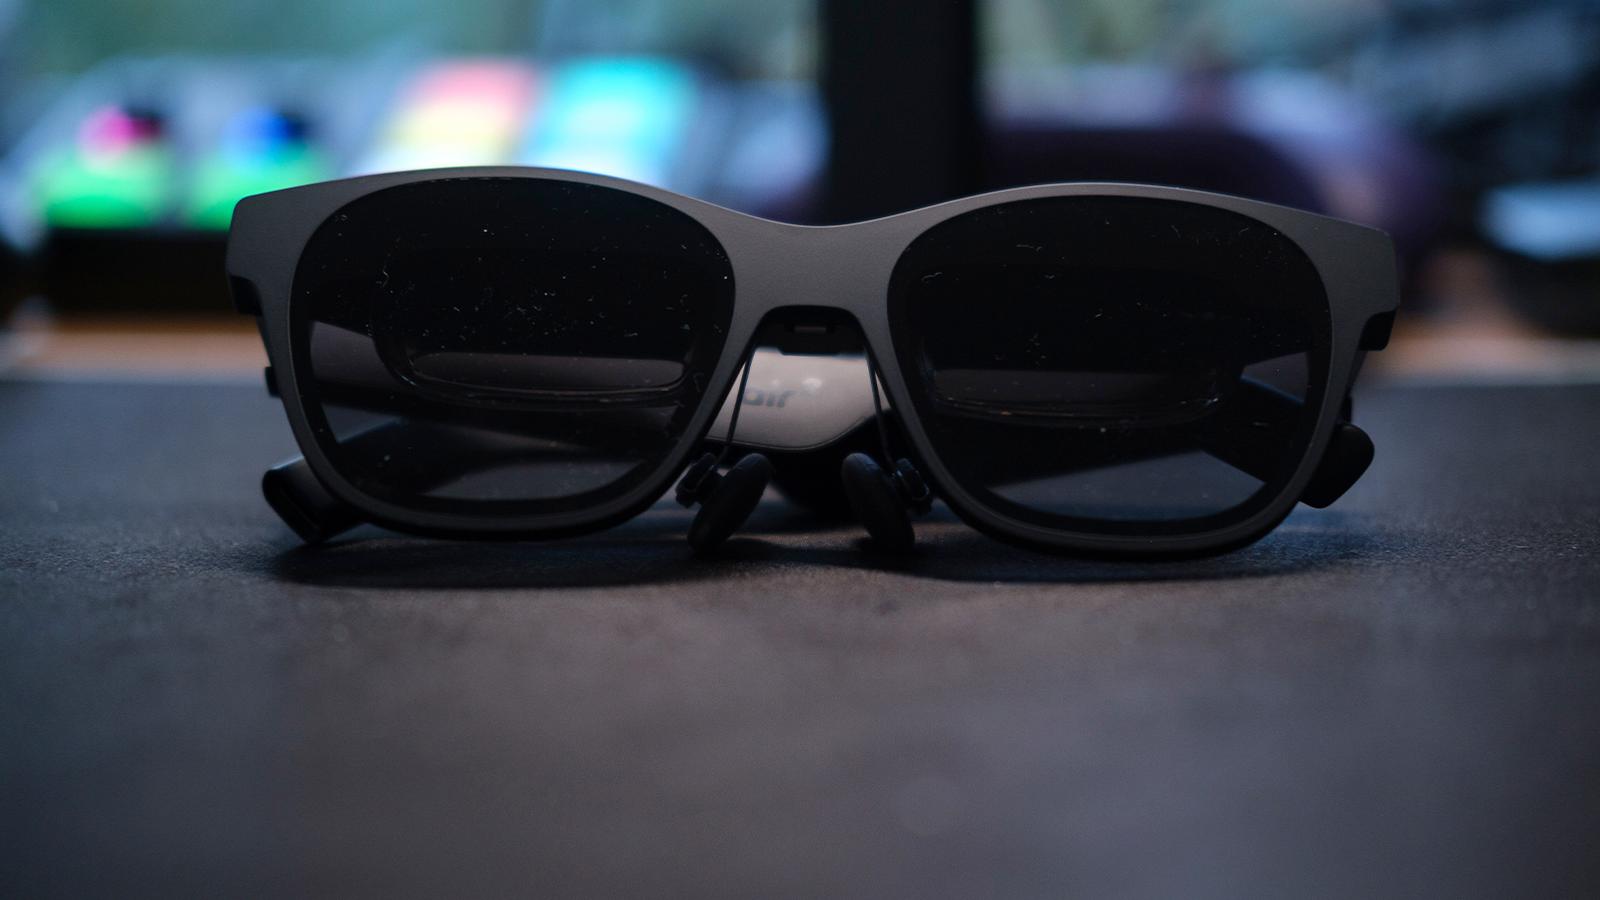 Xreal Air 2 Pro AR Glasses Review The Next Generation Of Augmented Reality